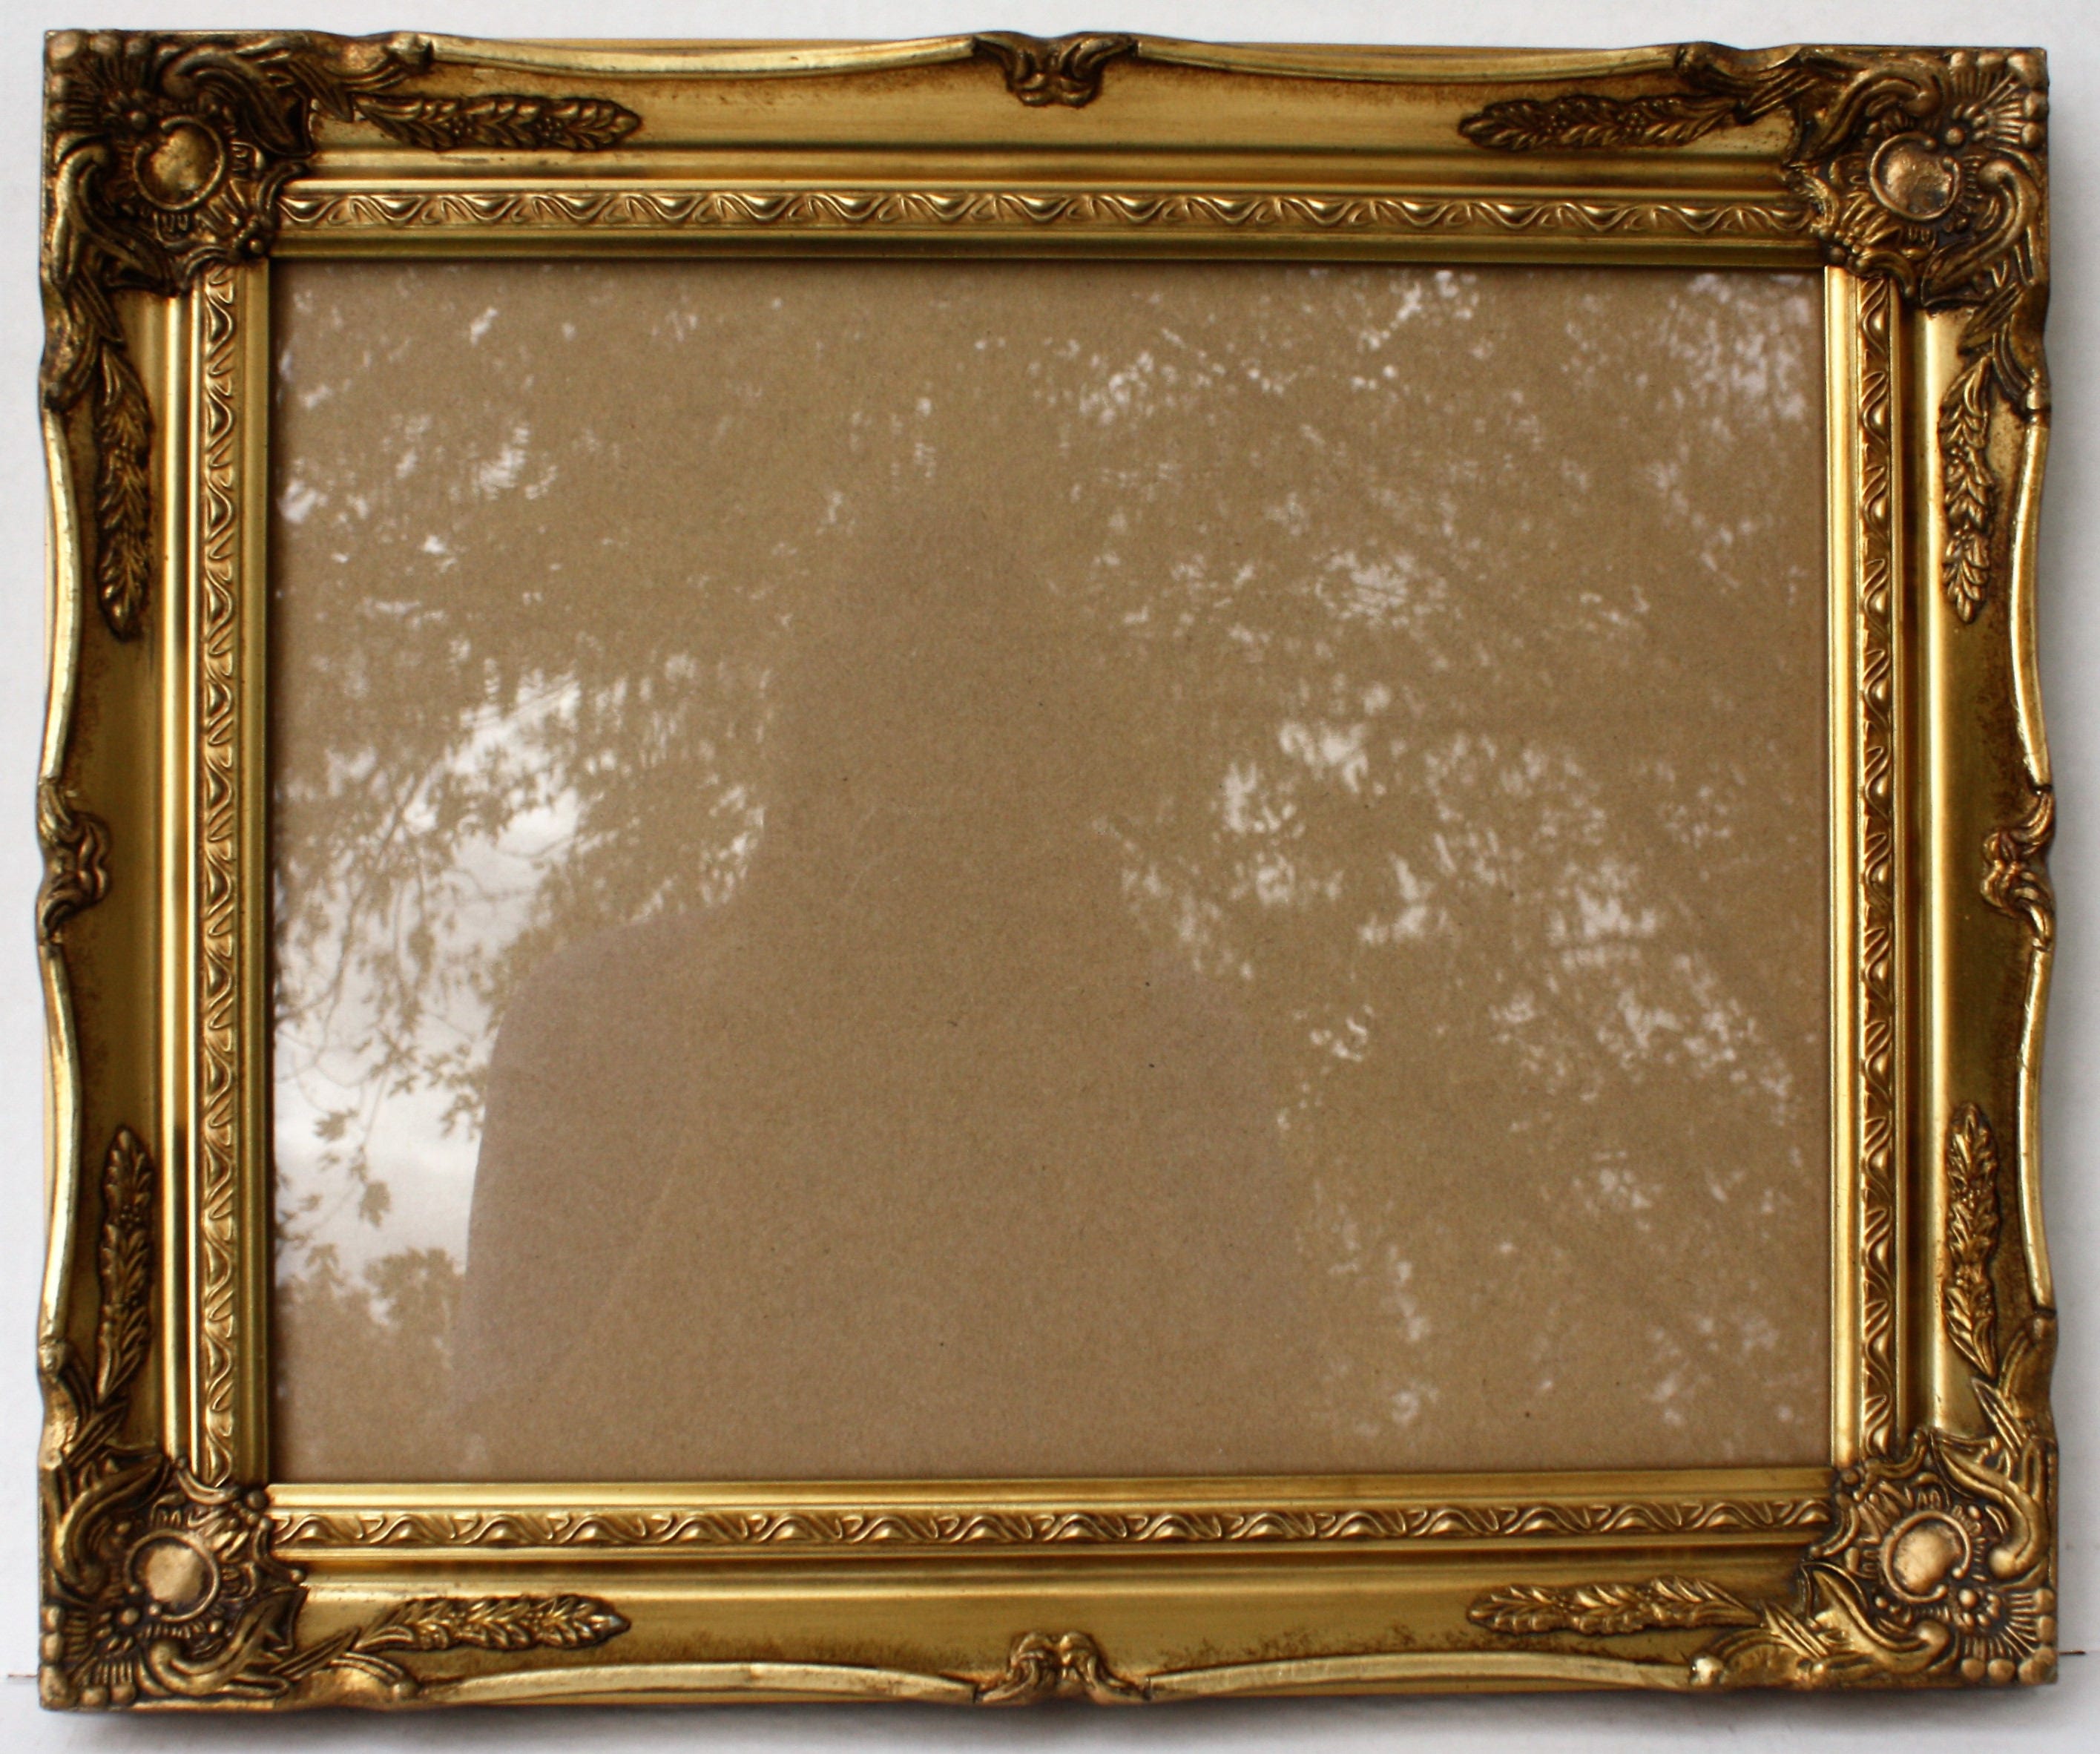 Gold Picture Frame Glass 11x14 Ornate Vintage Baroque Shabby | Free ...